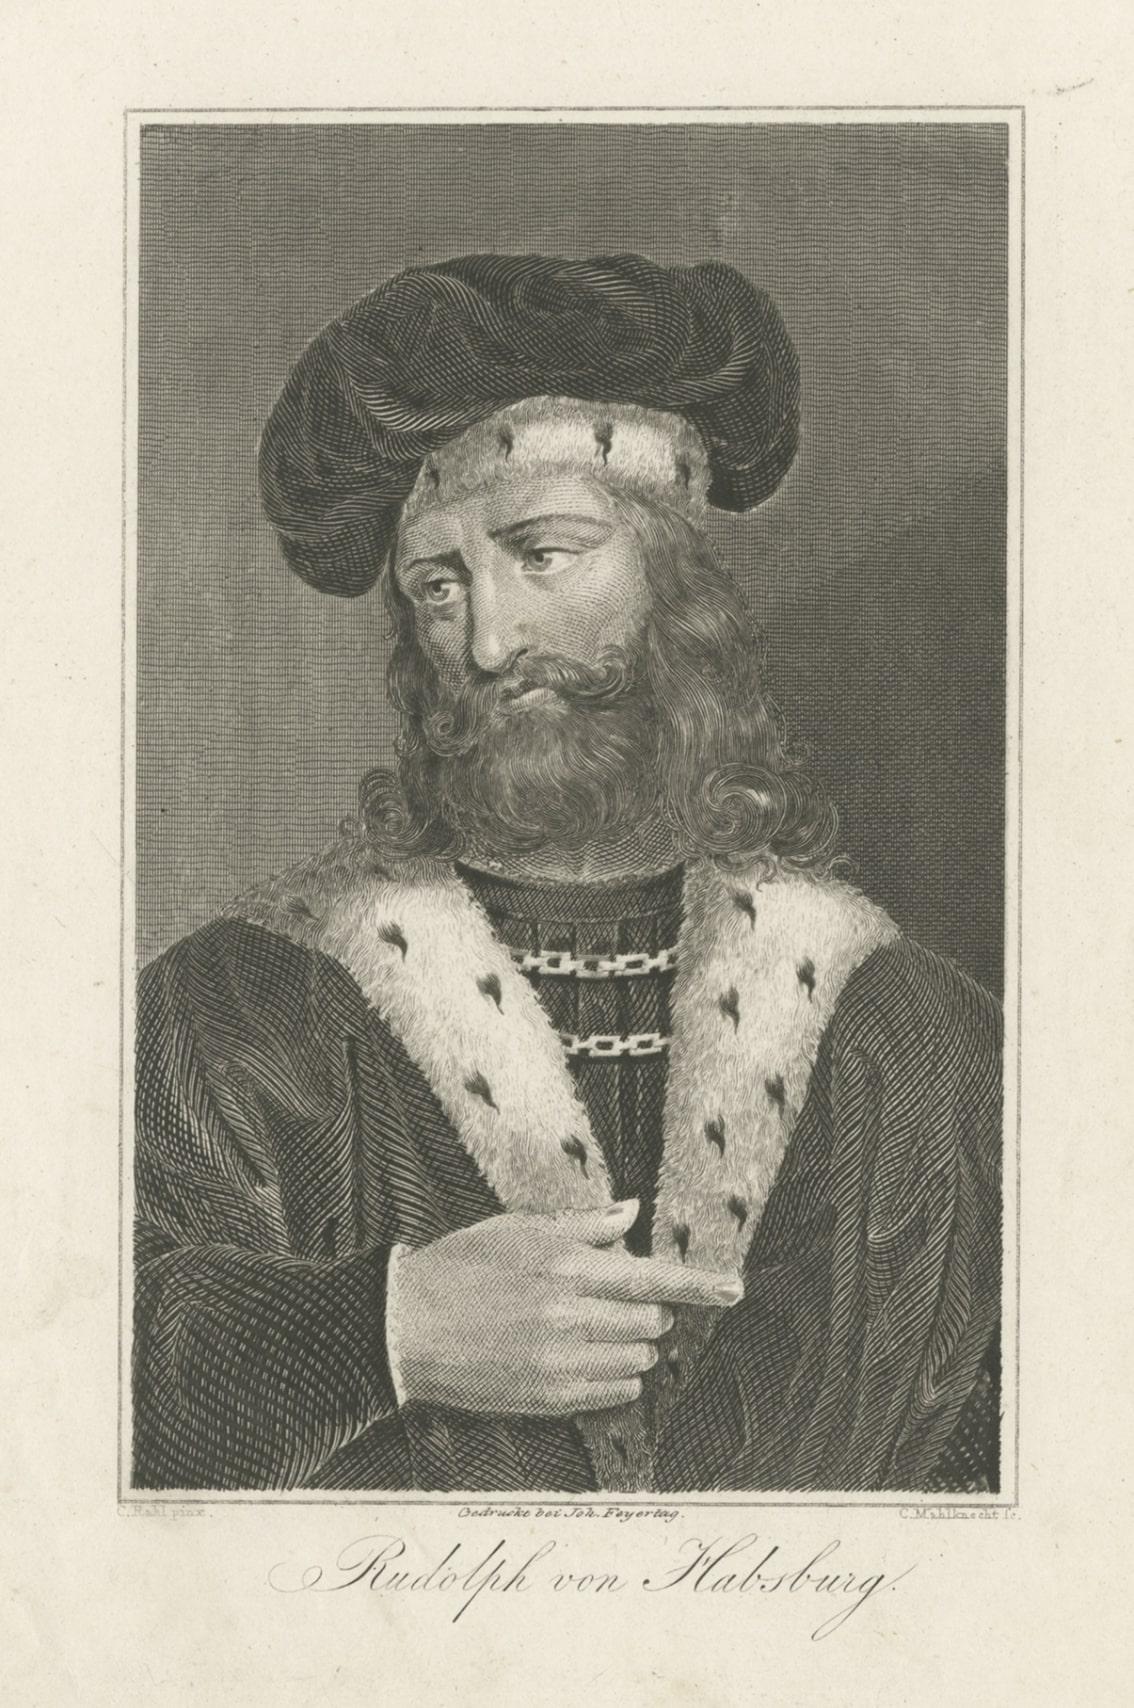 Antique print titled 'Rudolph von Habsburg'. 

Original antique portrait of Rudolf von Habsburg, Austrian emperor. Source unknown, to be determined. Published circa 1860. 

Artists and Engravers: Engraved by C. Mahlknecht after a painting by C.